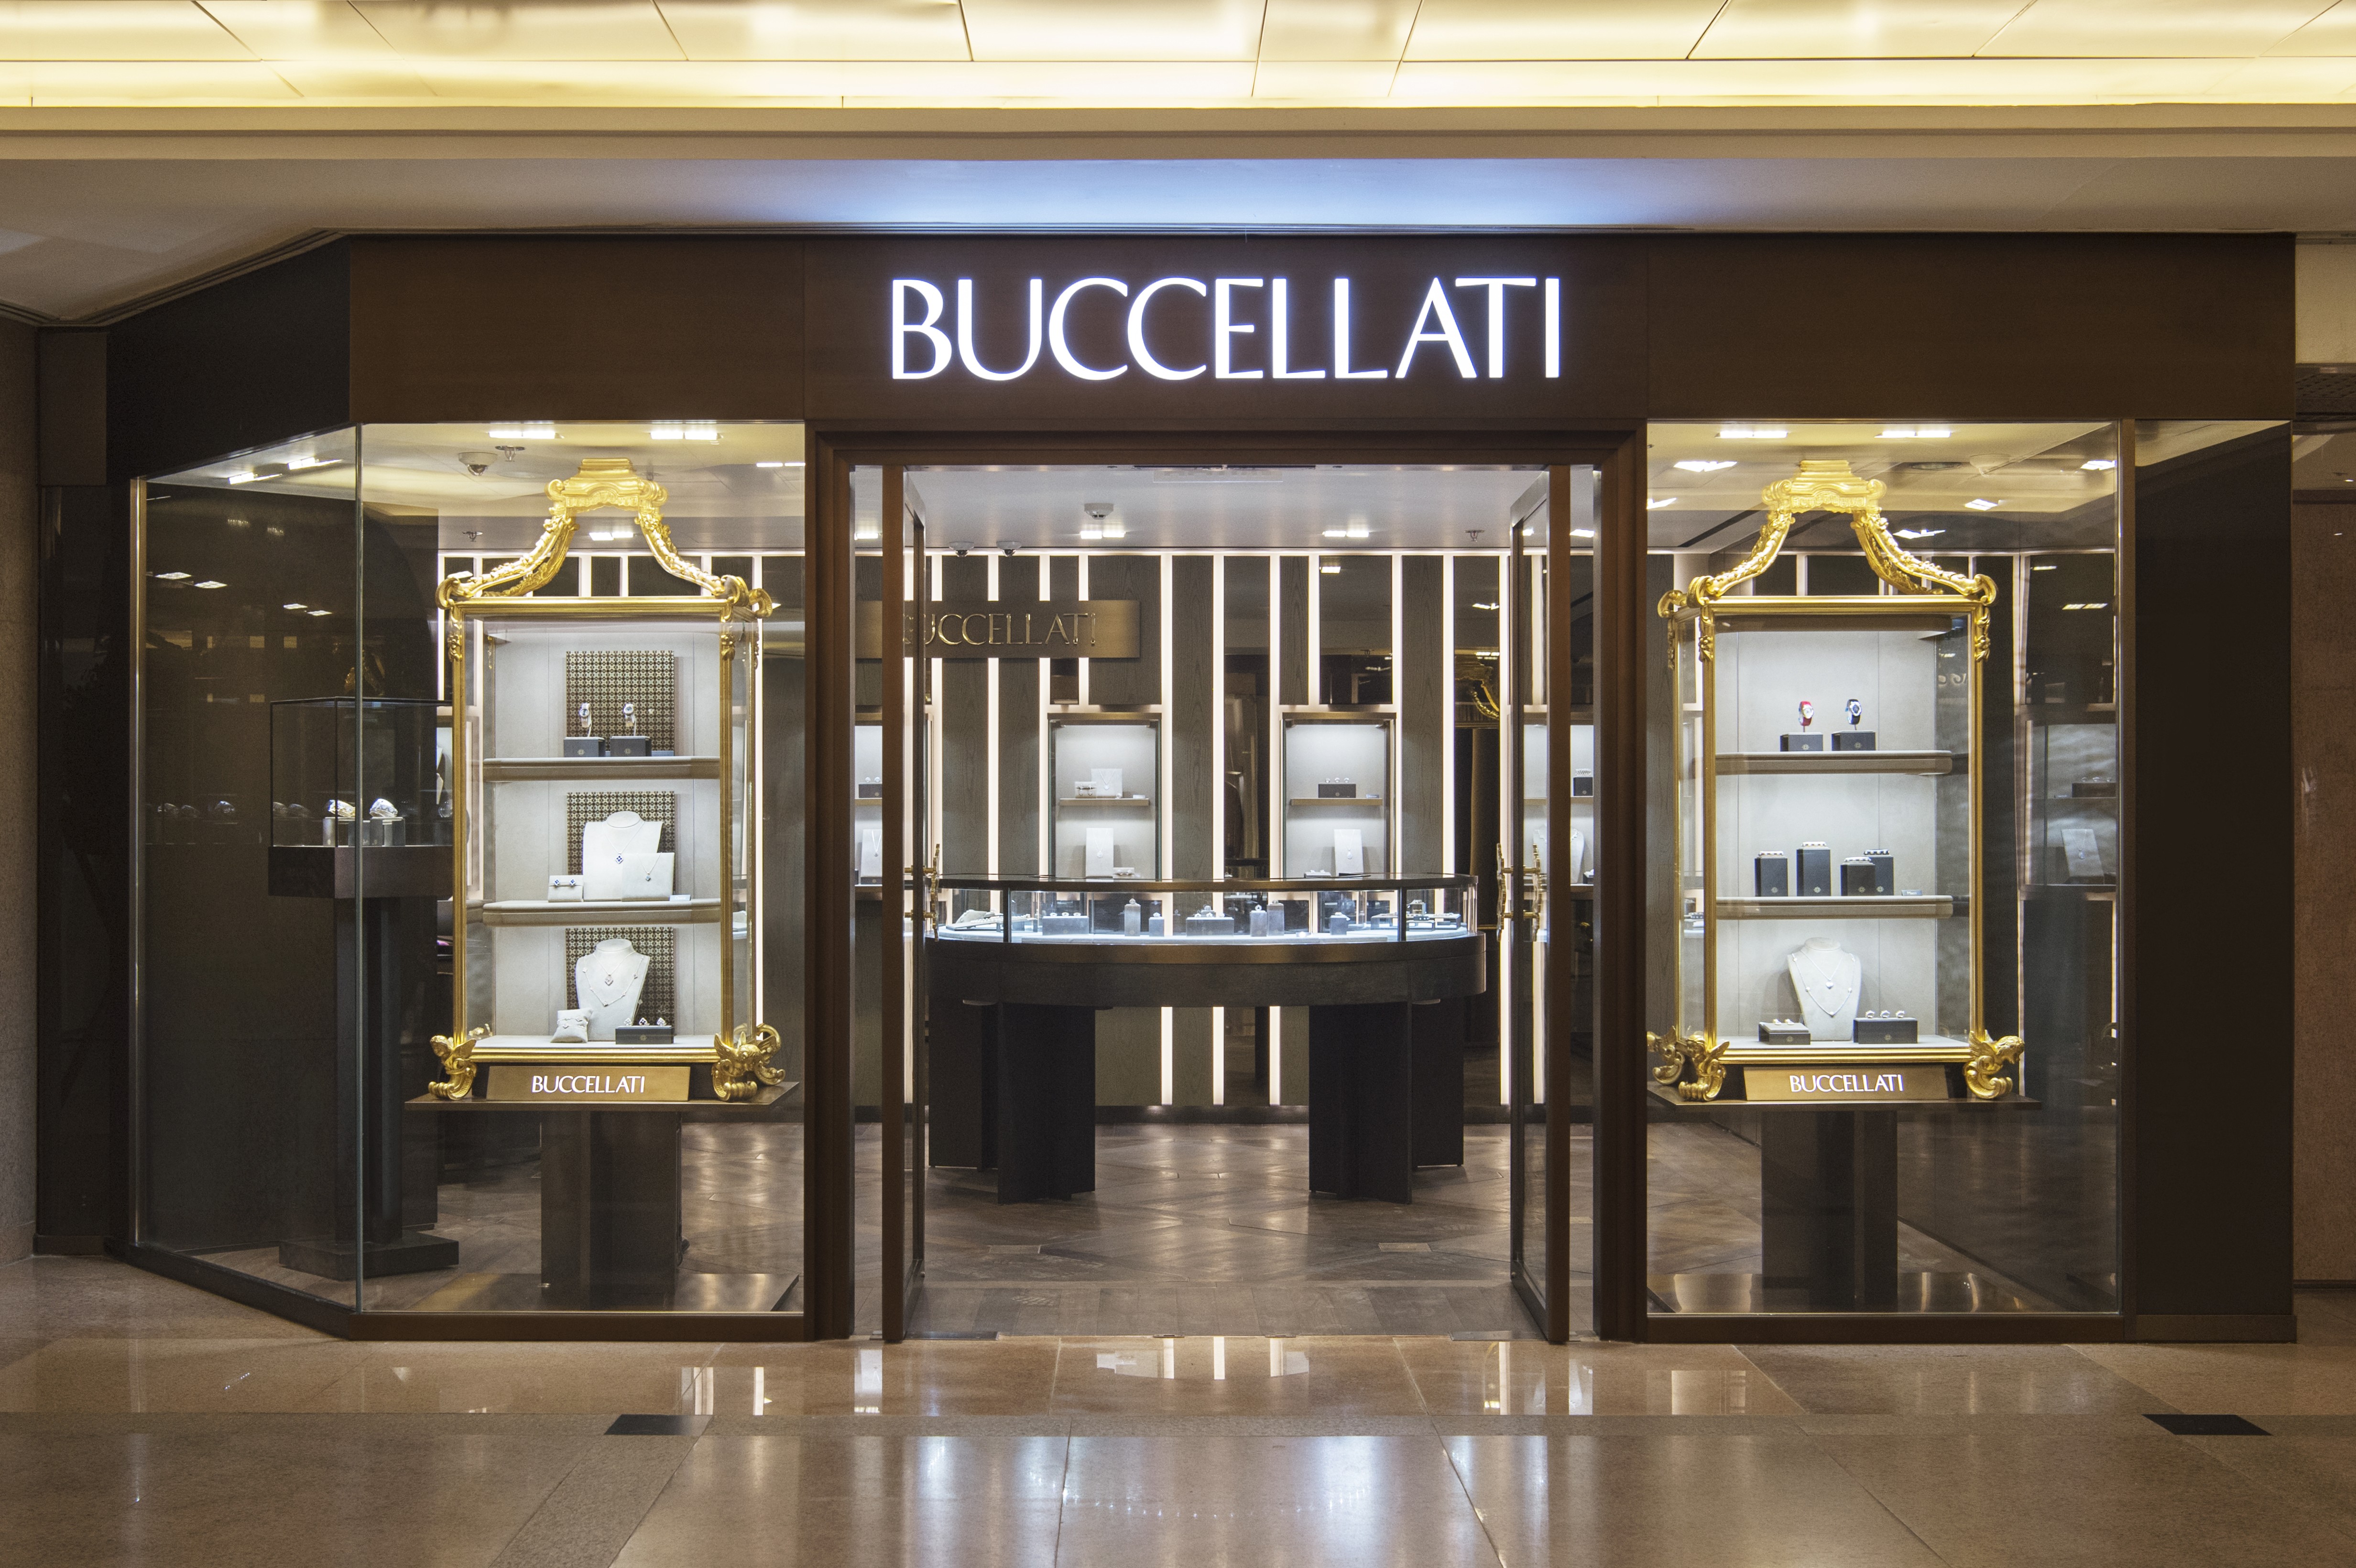 Buccellati’s new store at Harbour City is the sixth boutique launched by the Milan-based jewellery powerhouse in Asia.